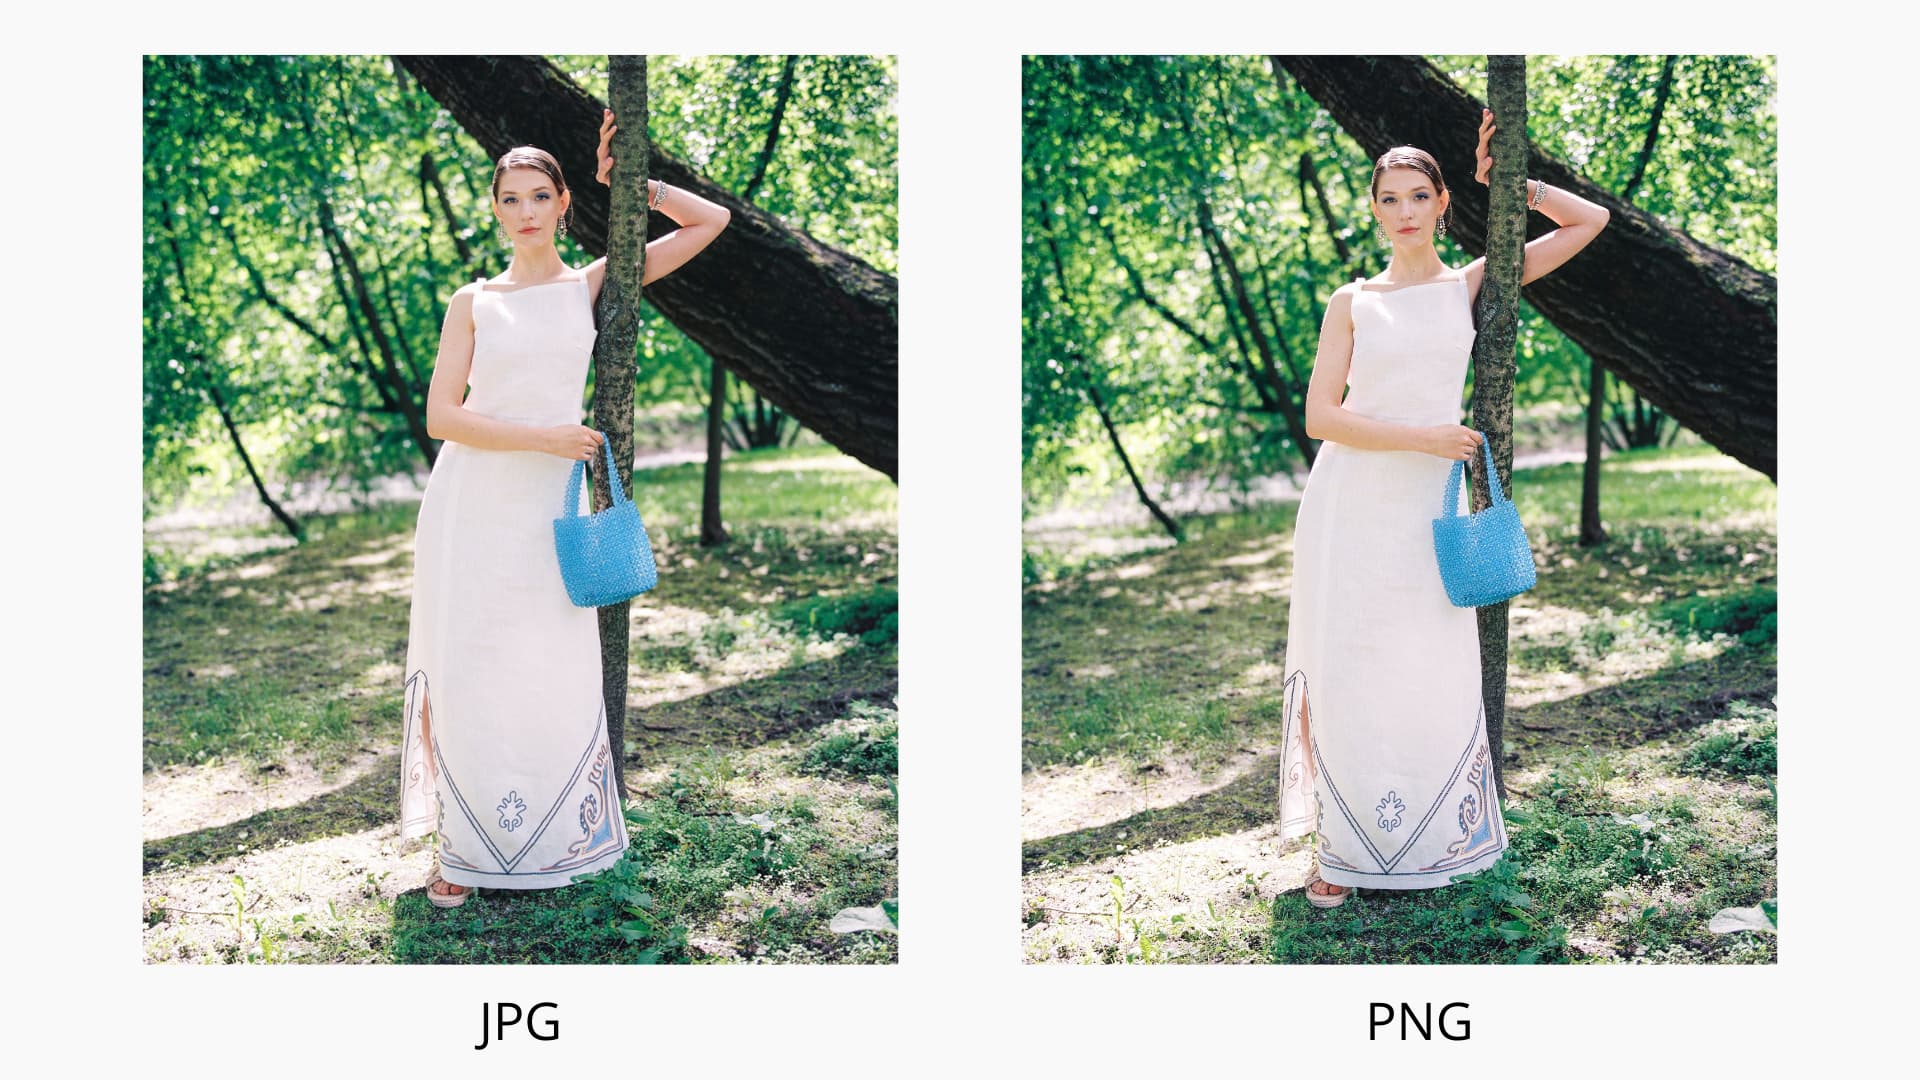 Convert image to JPG or PNG on iPhone, iPad